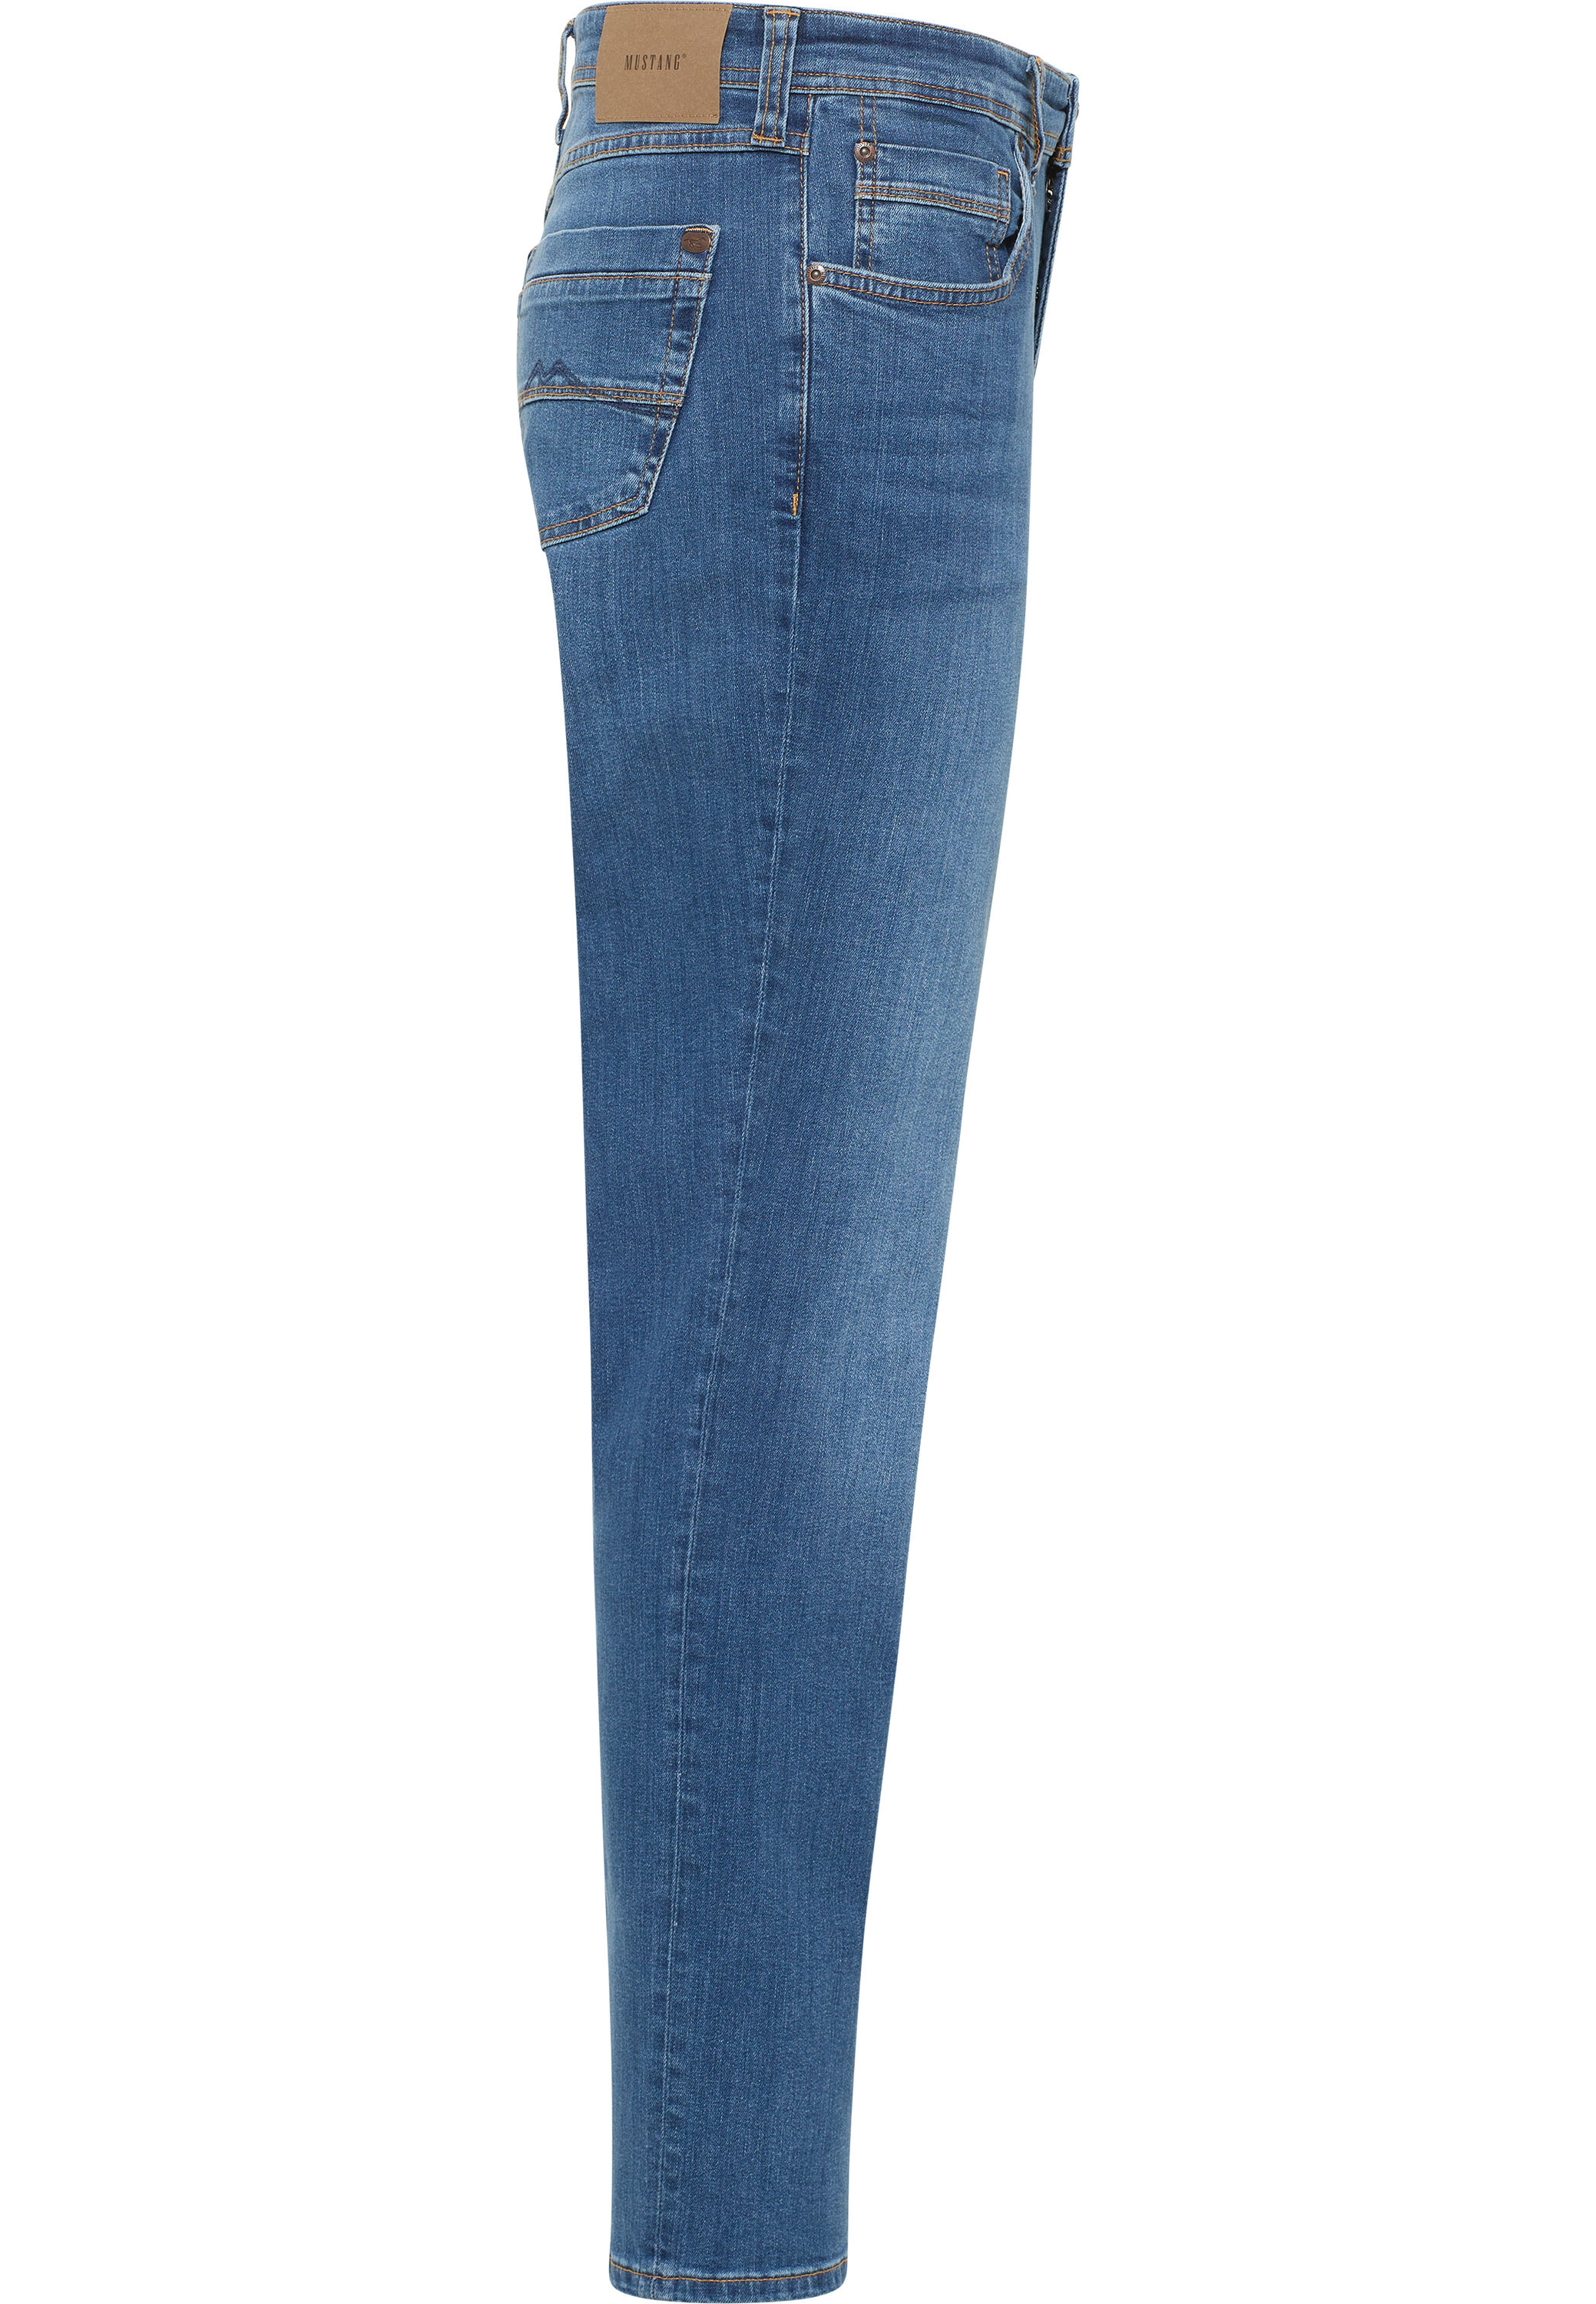 Mustang Washington Jeans Regular Fit cleanblue extra lang